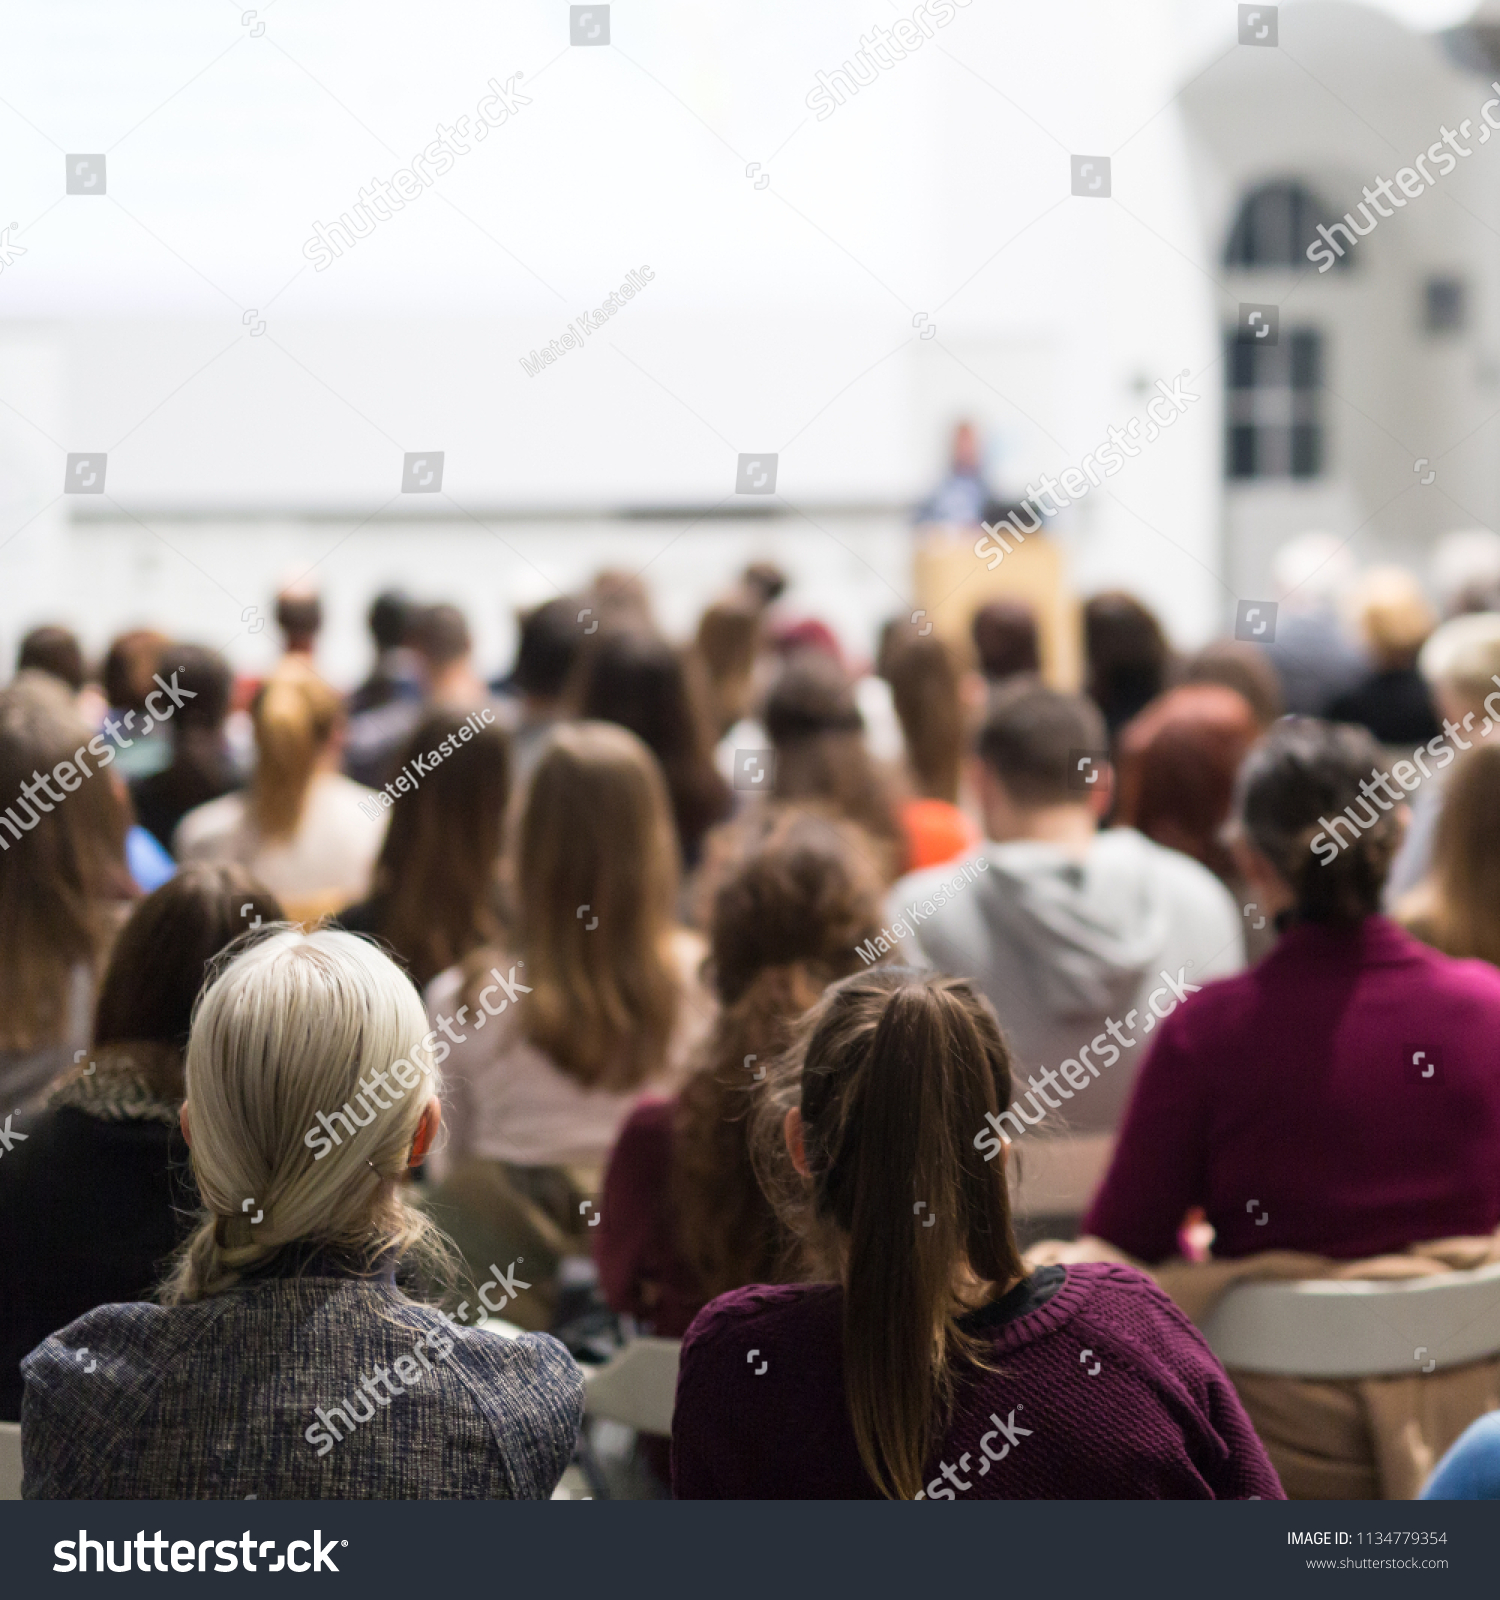 Female speaker giving presentation in lecture hall at university workshop. Audience in conference hall. Rear view of unrecognized participant in audience. Scientific conference event. #1134779354